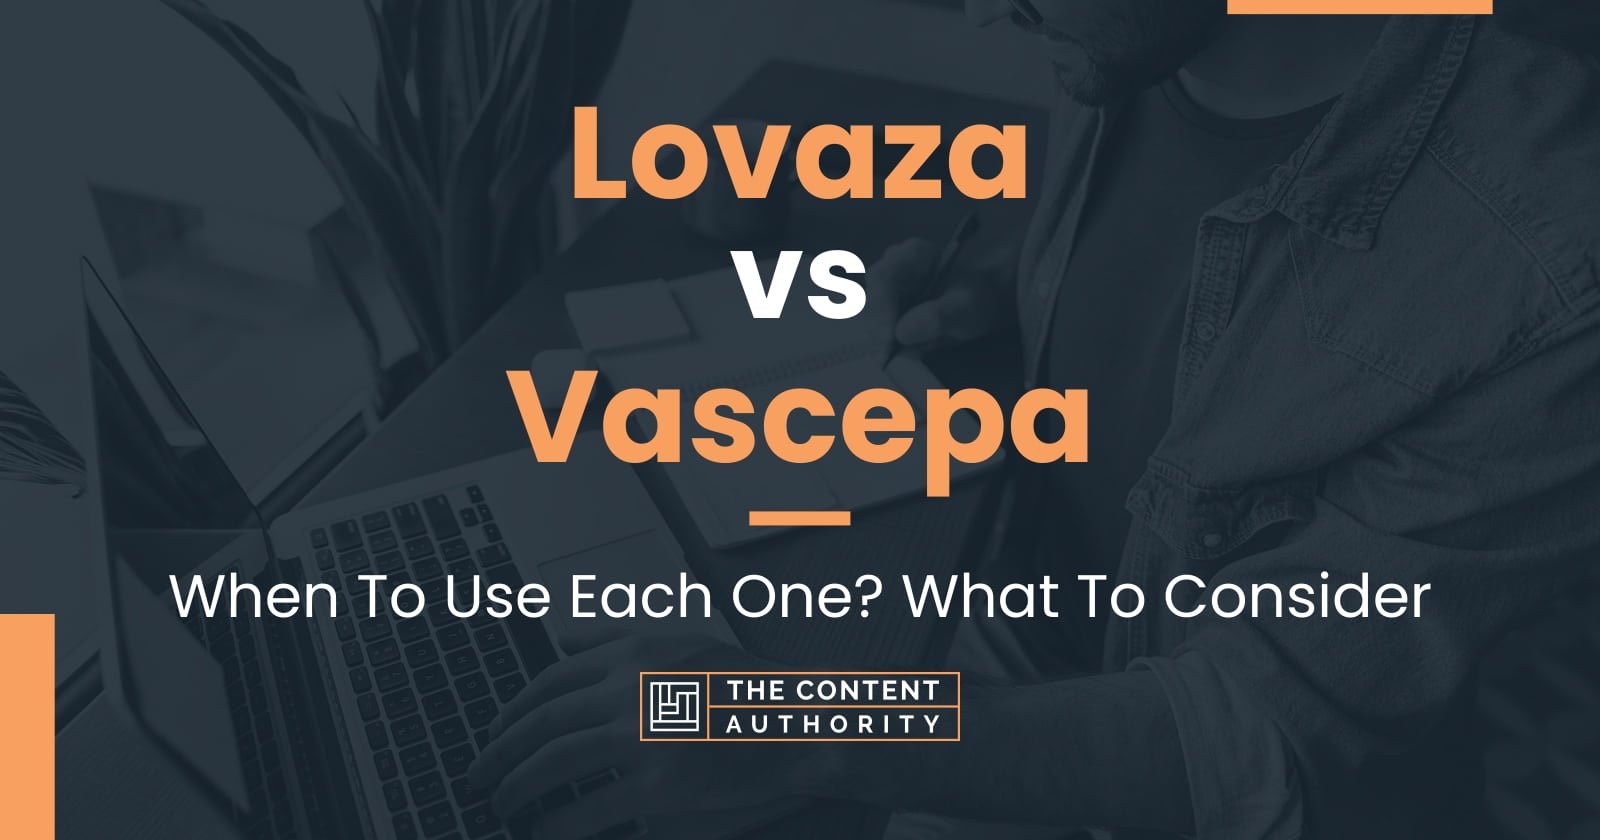 Lovaza vs Vascepa: When To Use Each One? What To Consider